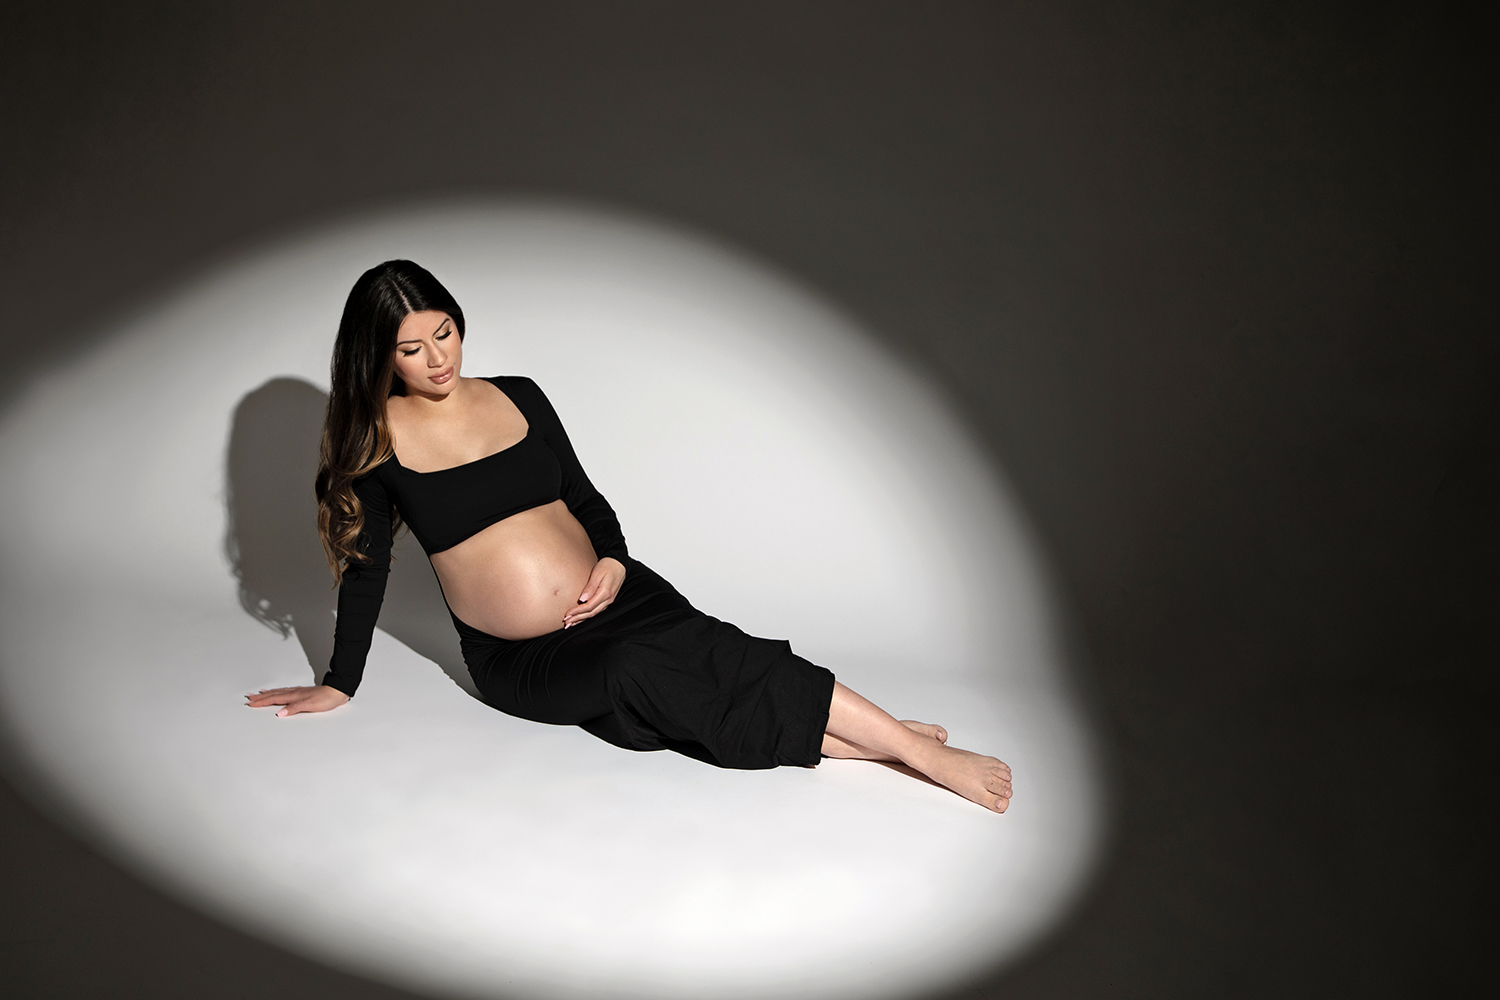 A confident woman rocks a bold black two piece set in a maternity photoshoot